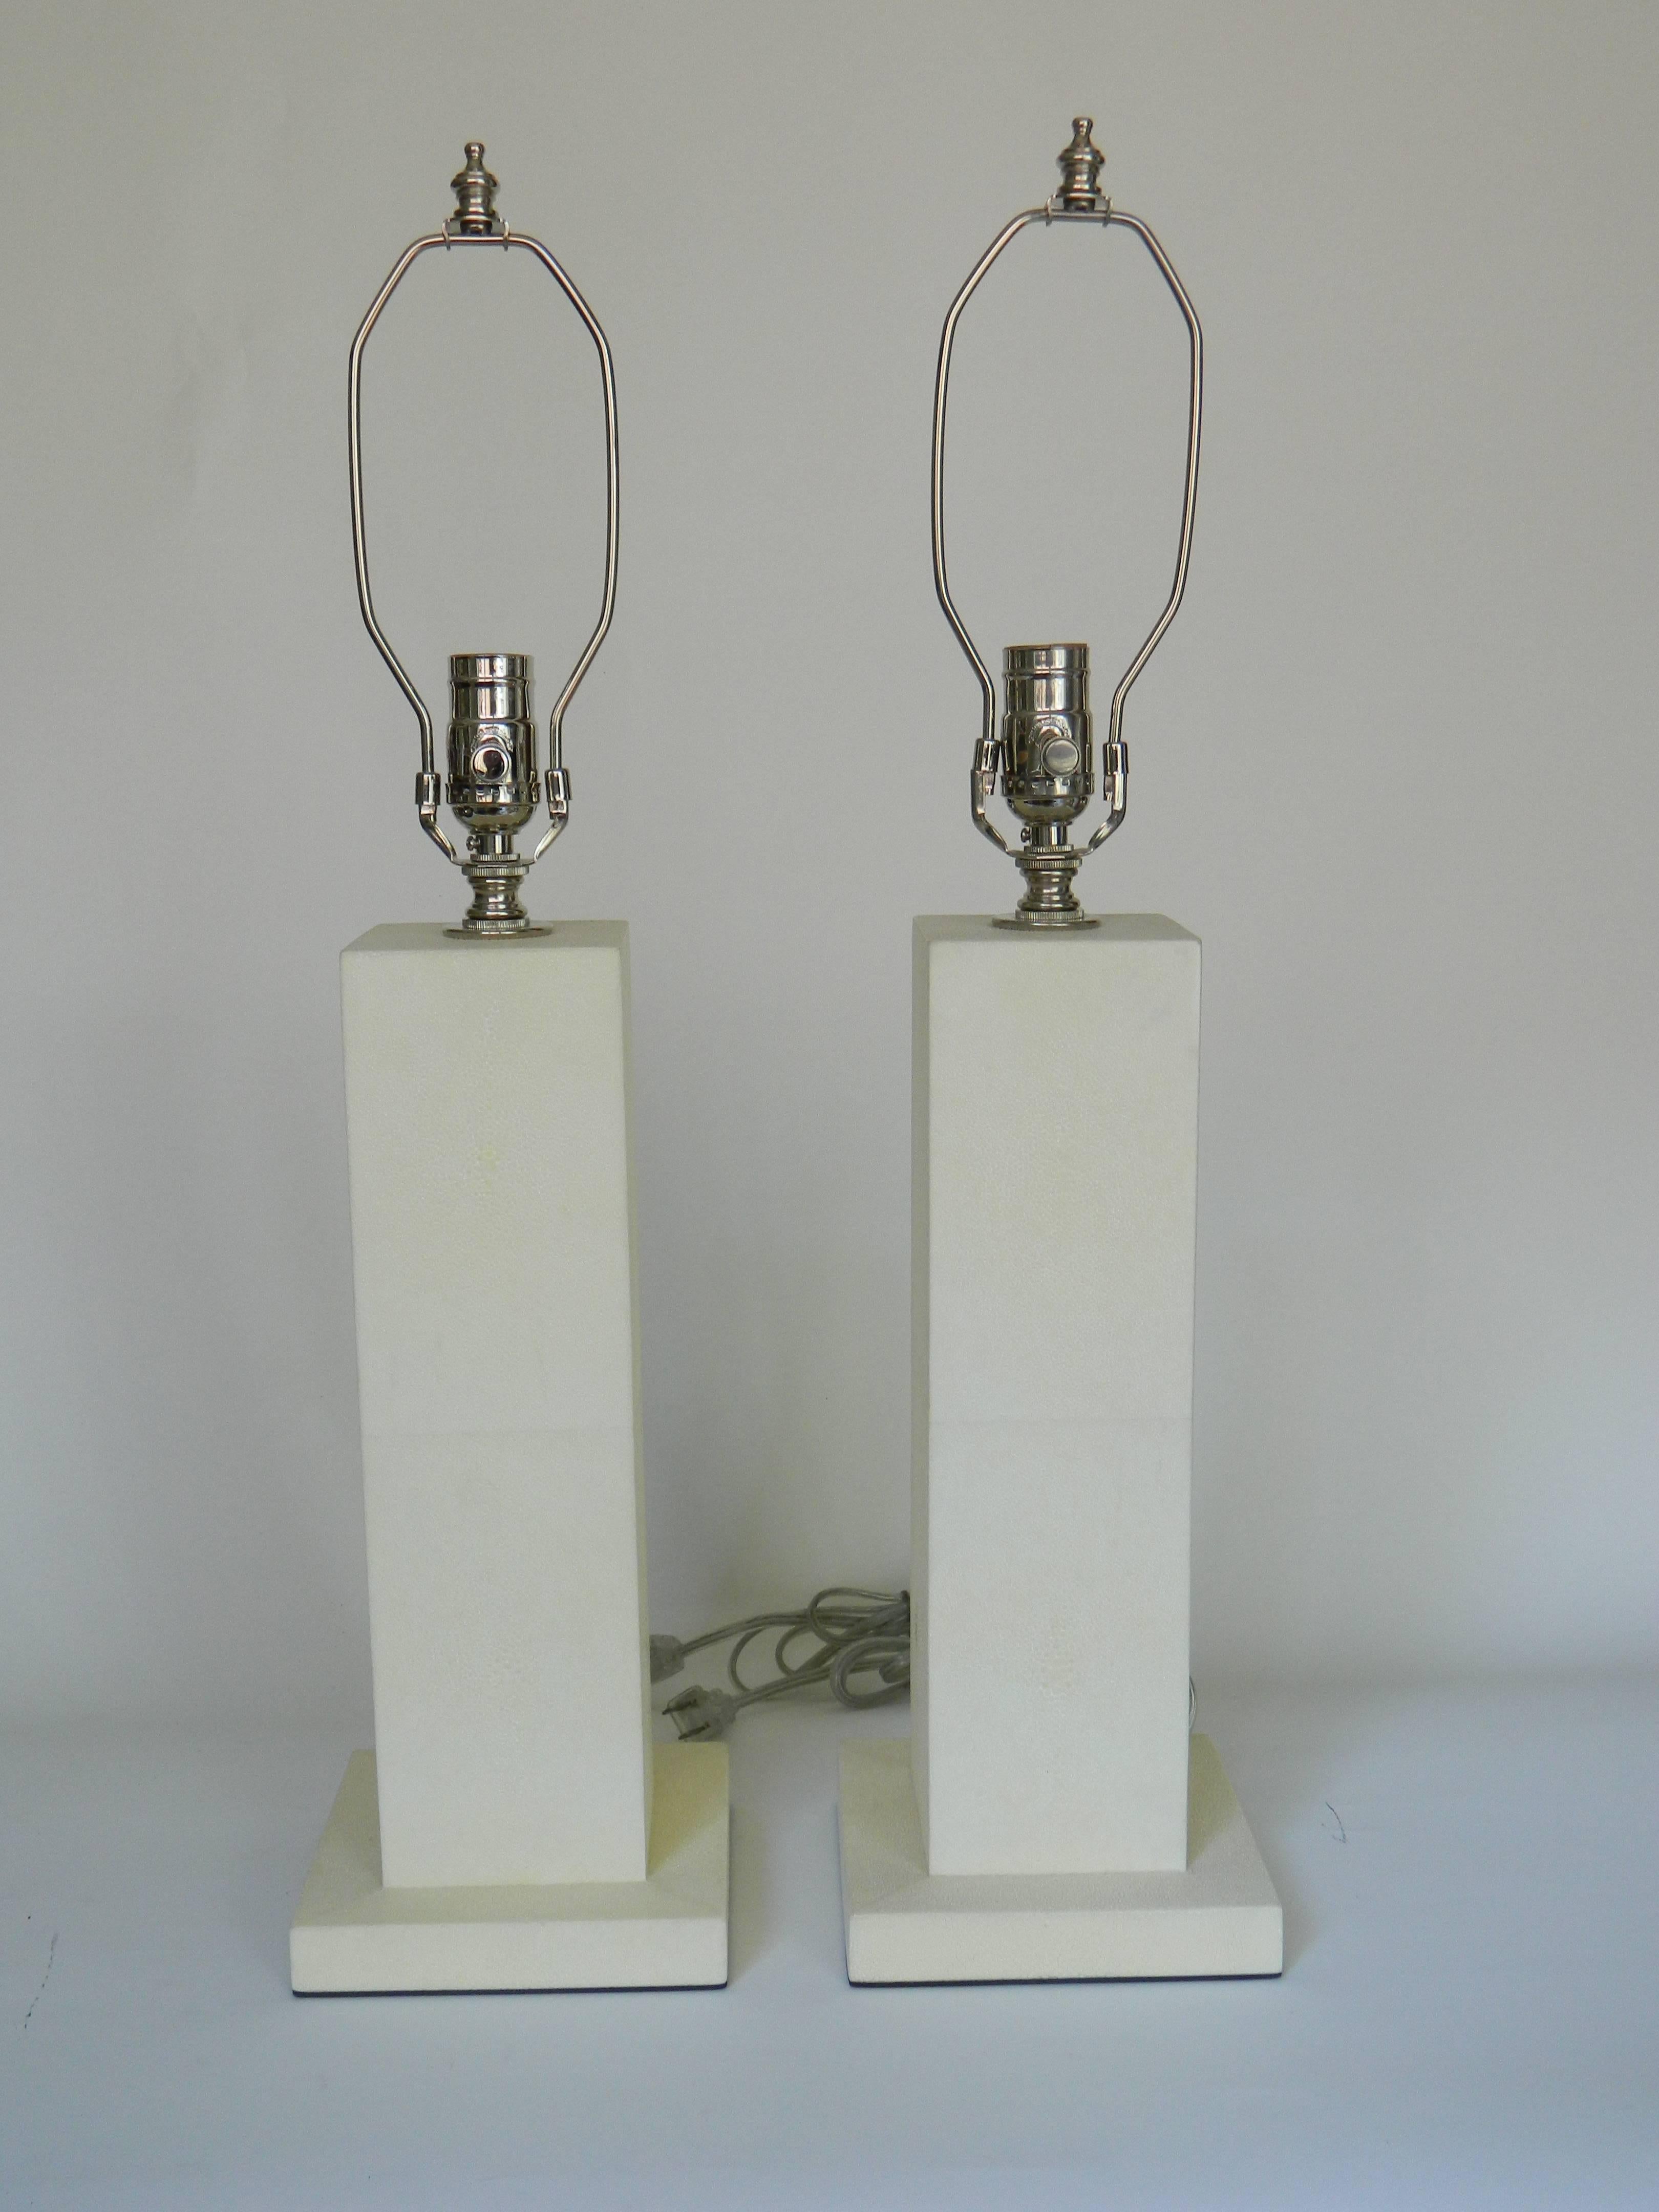 Ivory shagreen table lamps.
Size: 15''H excluding the socket, base: 6.25''square.